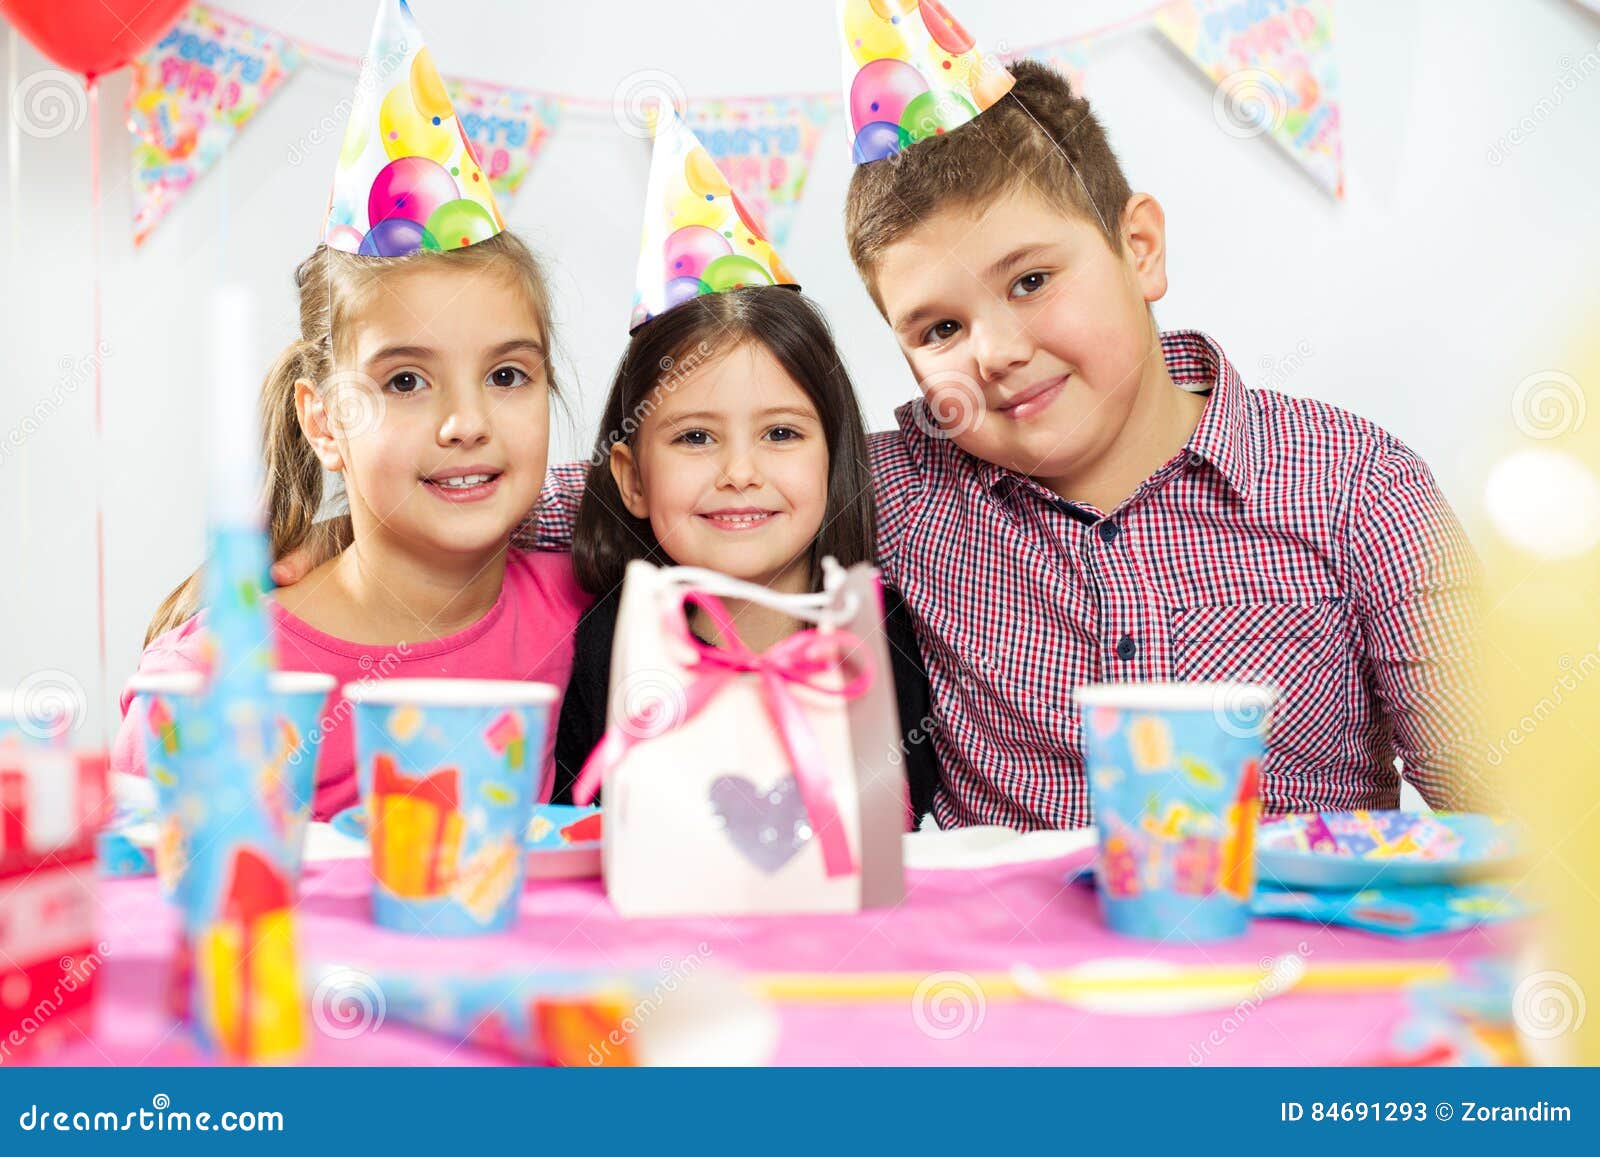 Happy Group of Children Having Fun at Birthday Party Stock Image ...